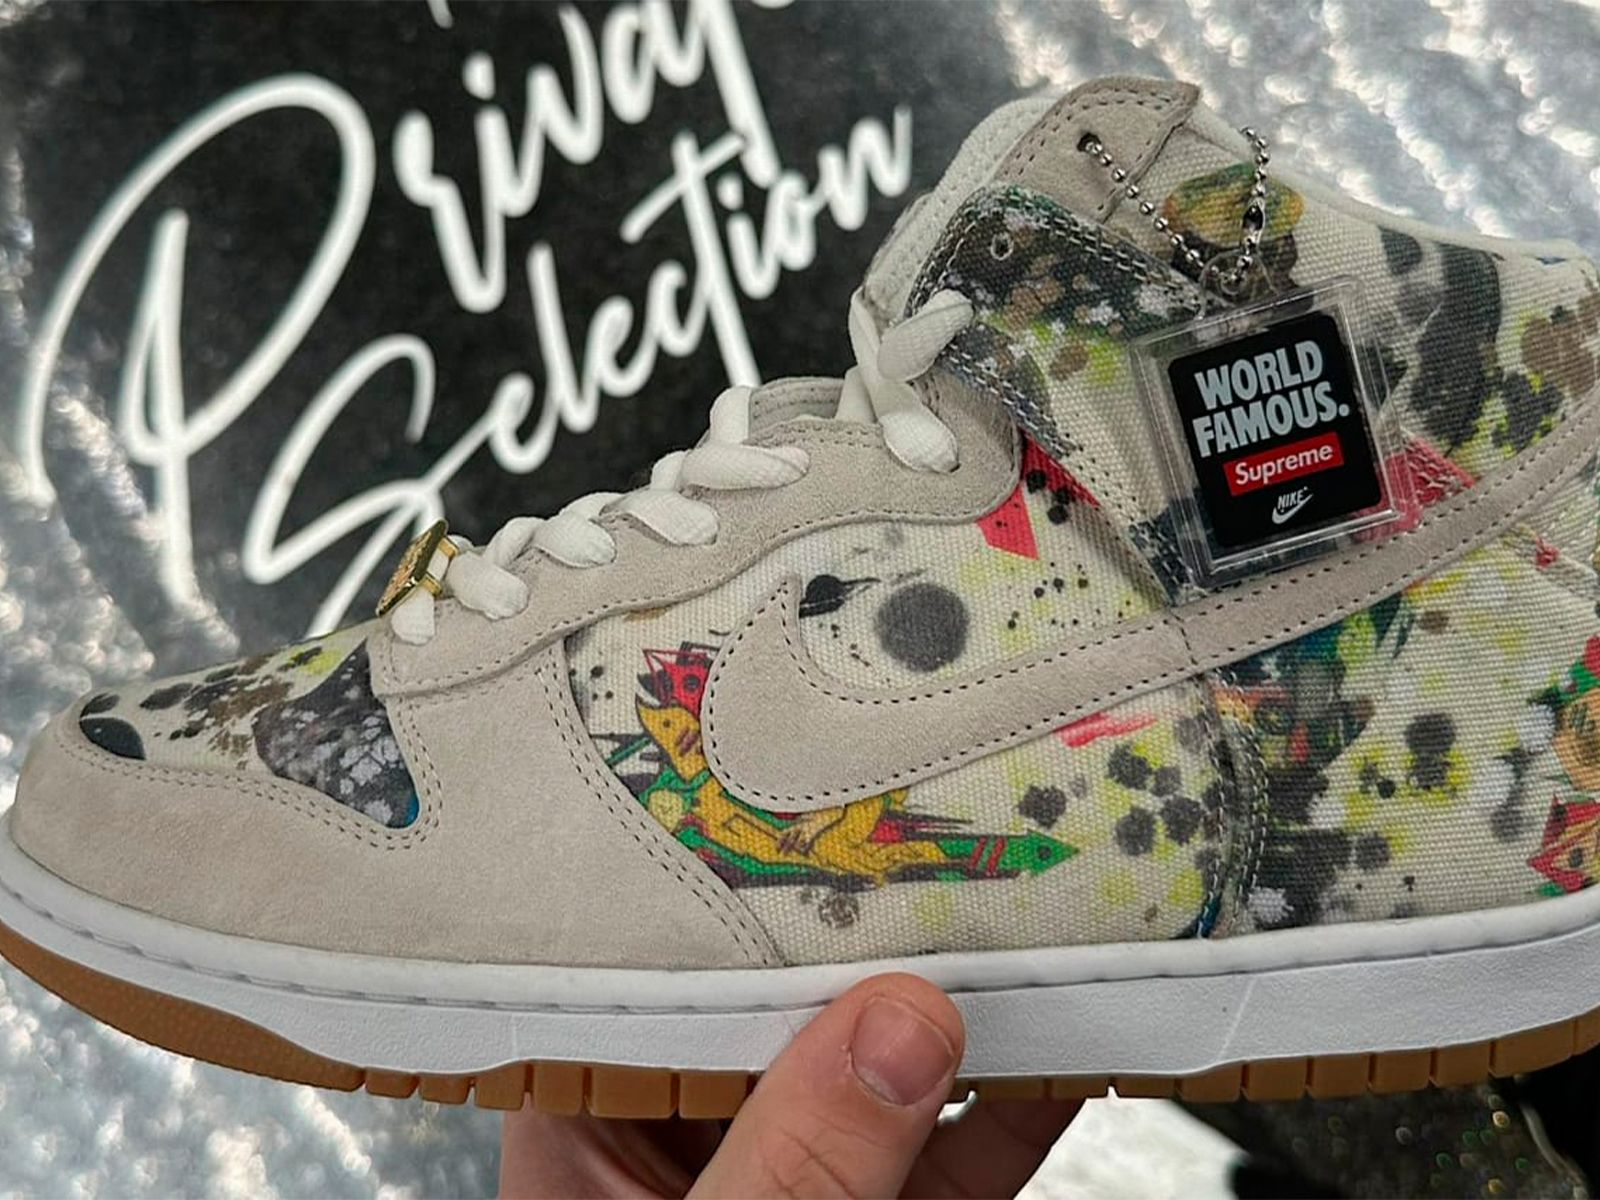 First images of the Supreme x Nike SB Dunk High Rammellzee are